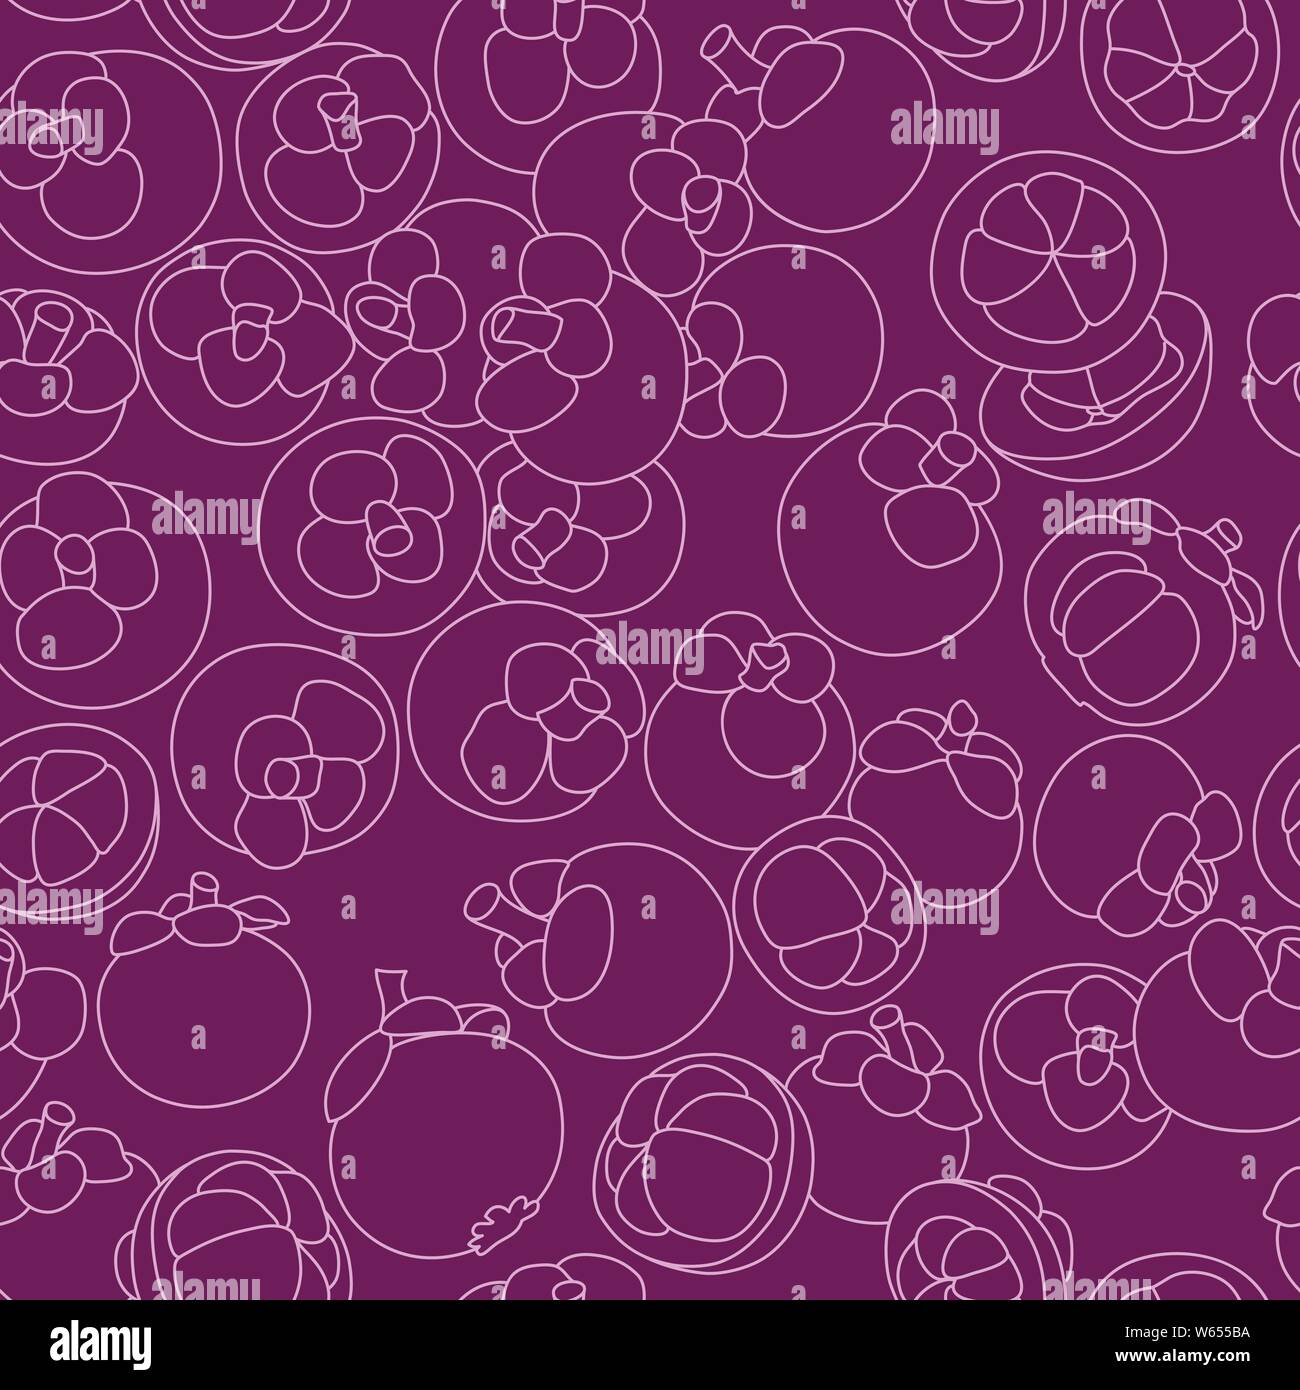 Artistic and Detailed Mangosteen Fruit Line Drawing Seamless Pattern on Purple Background. Hand-drawn Asia Fruit Design for Packaging, Printing, Poste Stock Vector